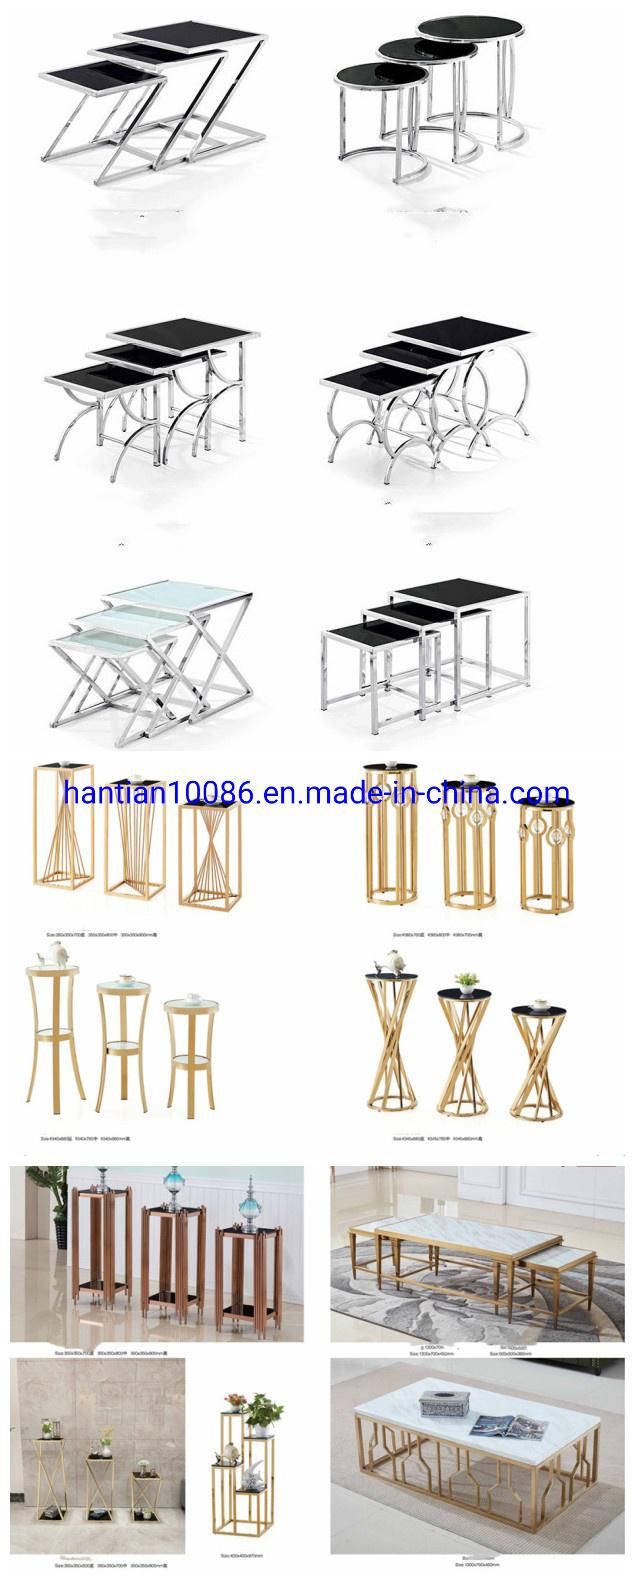 New Design LED Light Inside Home Furniture Black Glass and Silver Stainless Steel Dining Table